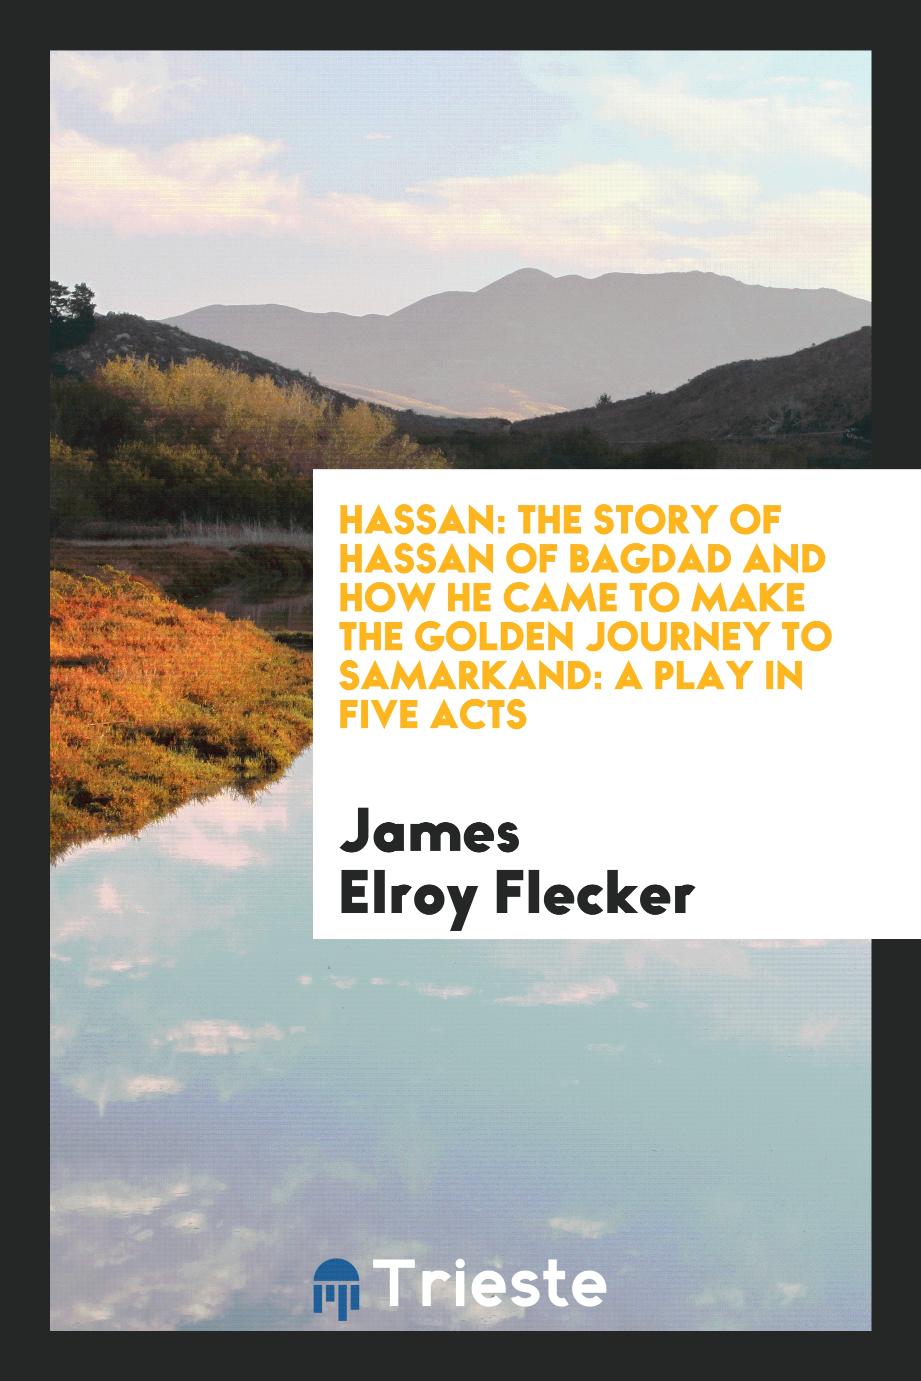 Hassan: the story of Hassan of Bagdad and how he came to make the golden journey to Samarkand: a play in five acts